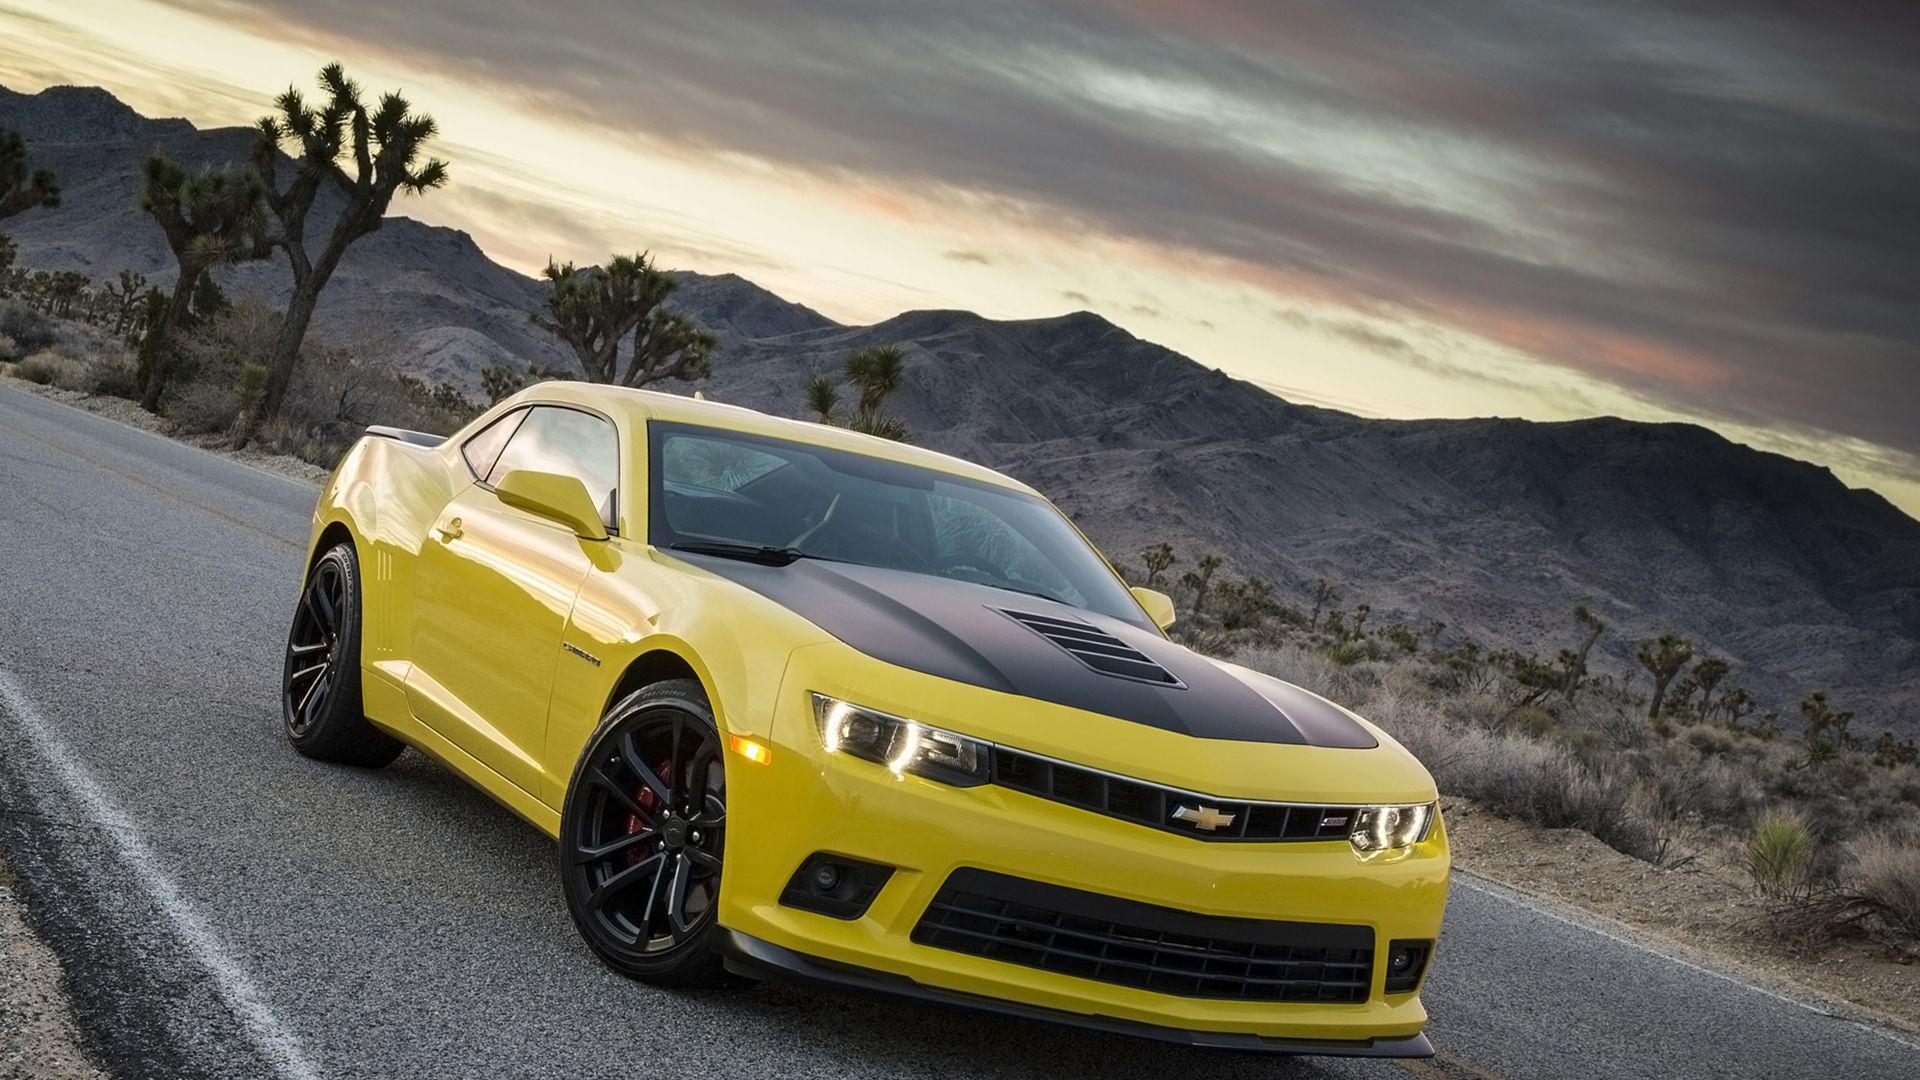 Chevrolet Camaro Review and Specs. Car Price 2019